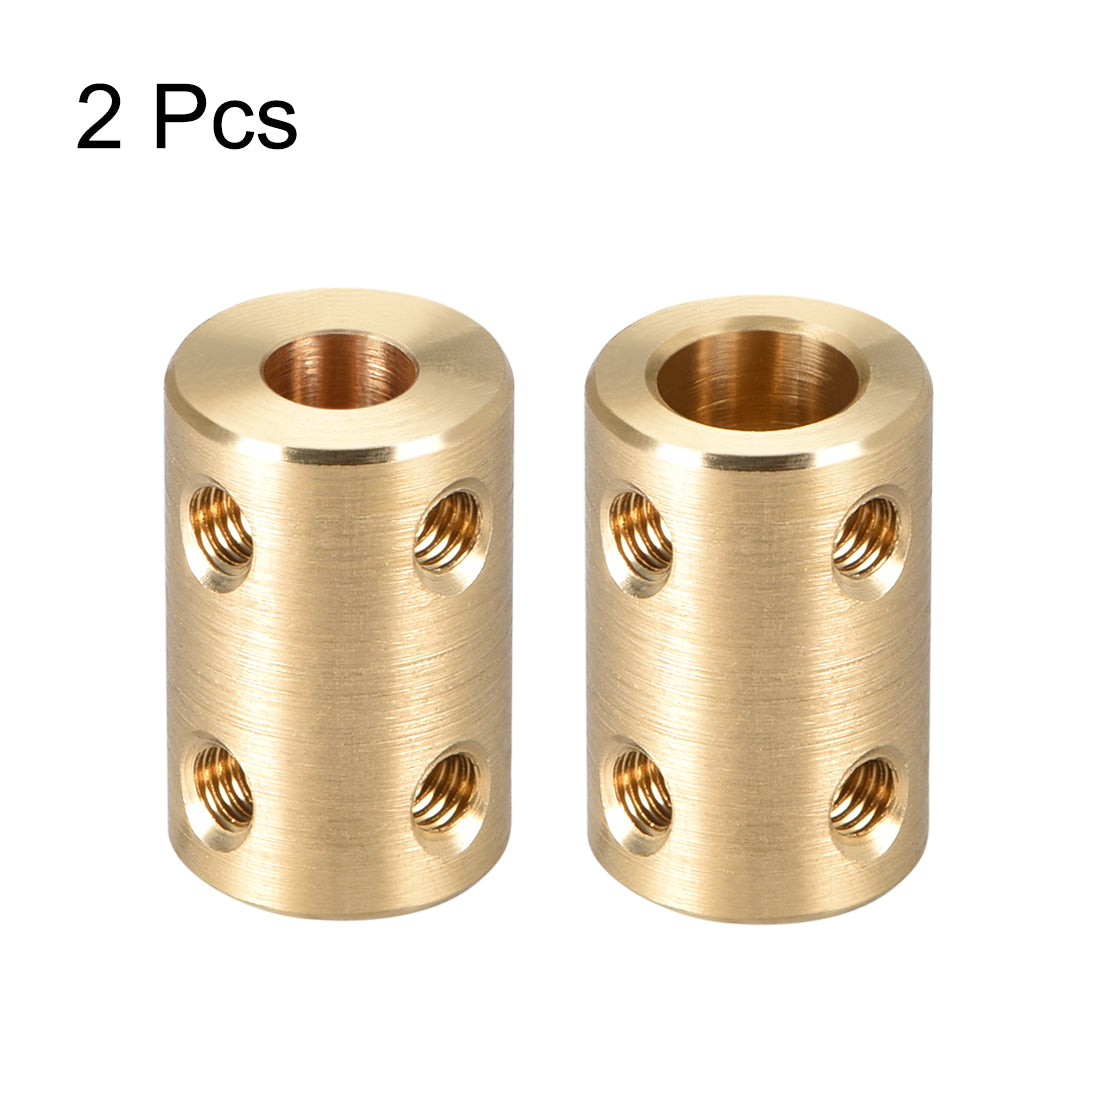 uxcell Uxcell Shaft Coupling 6mm to 8mm Bore L22xD14 Robot Motor Wheel Rigid Coupler Connector Gold Tone 2PCS